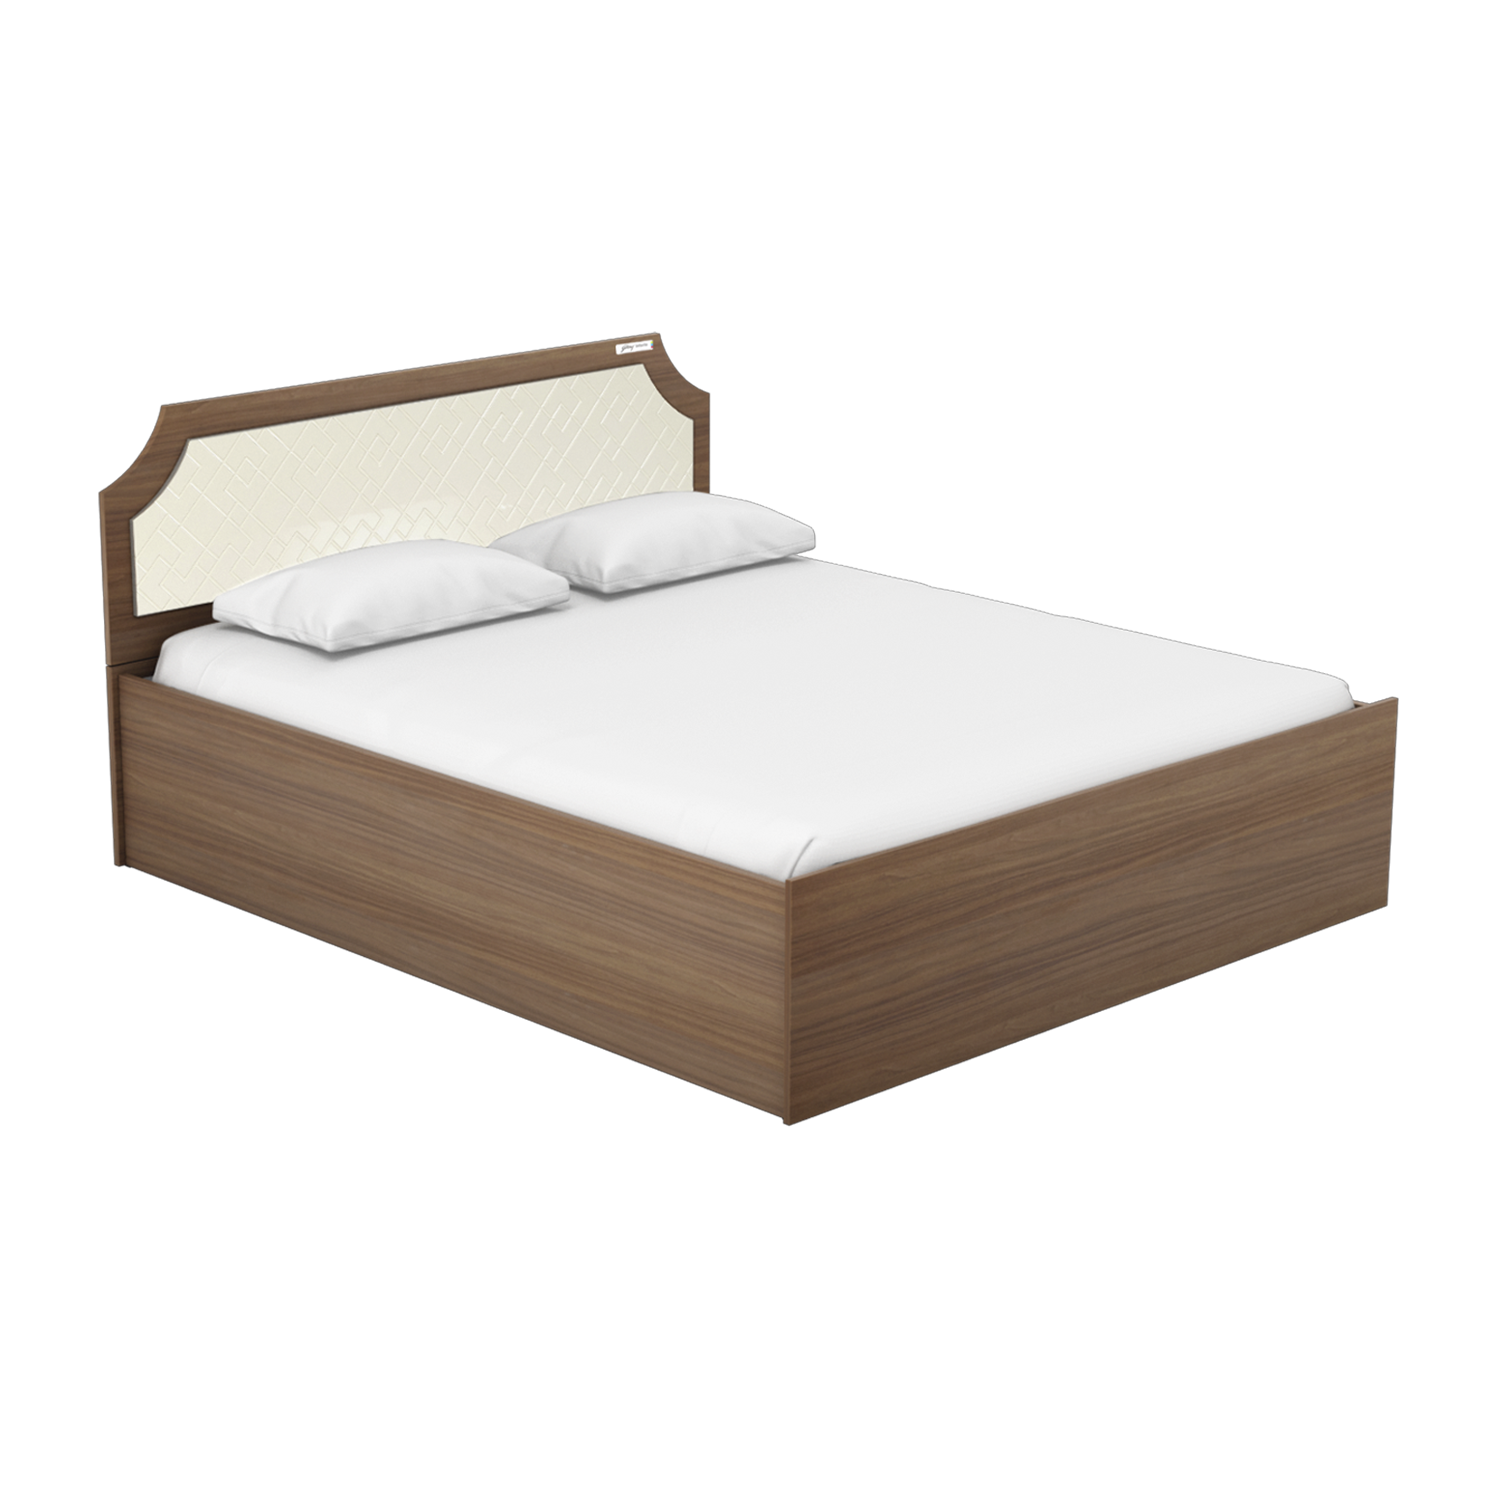 Morf N Chant King Bed With, King Size Bed Images